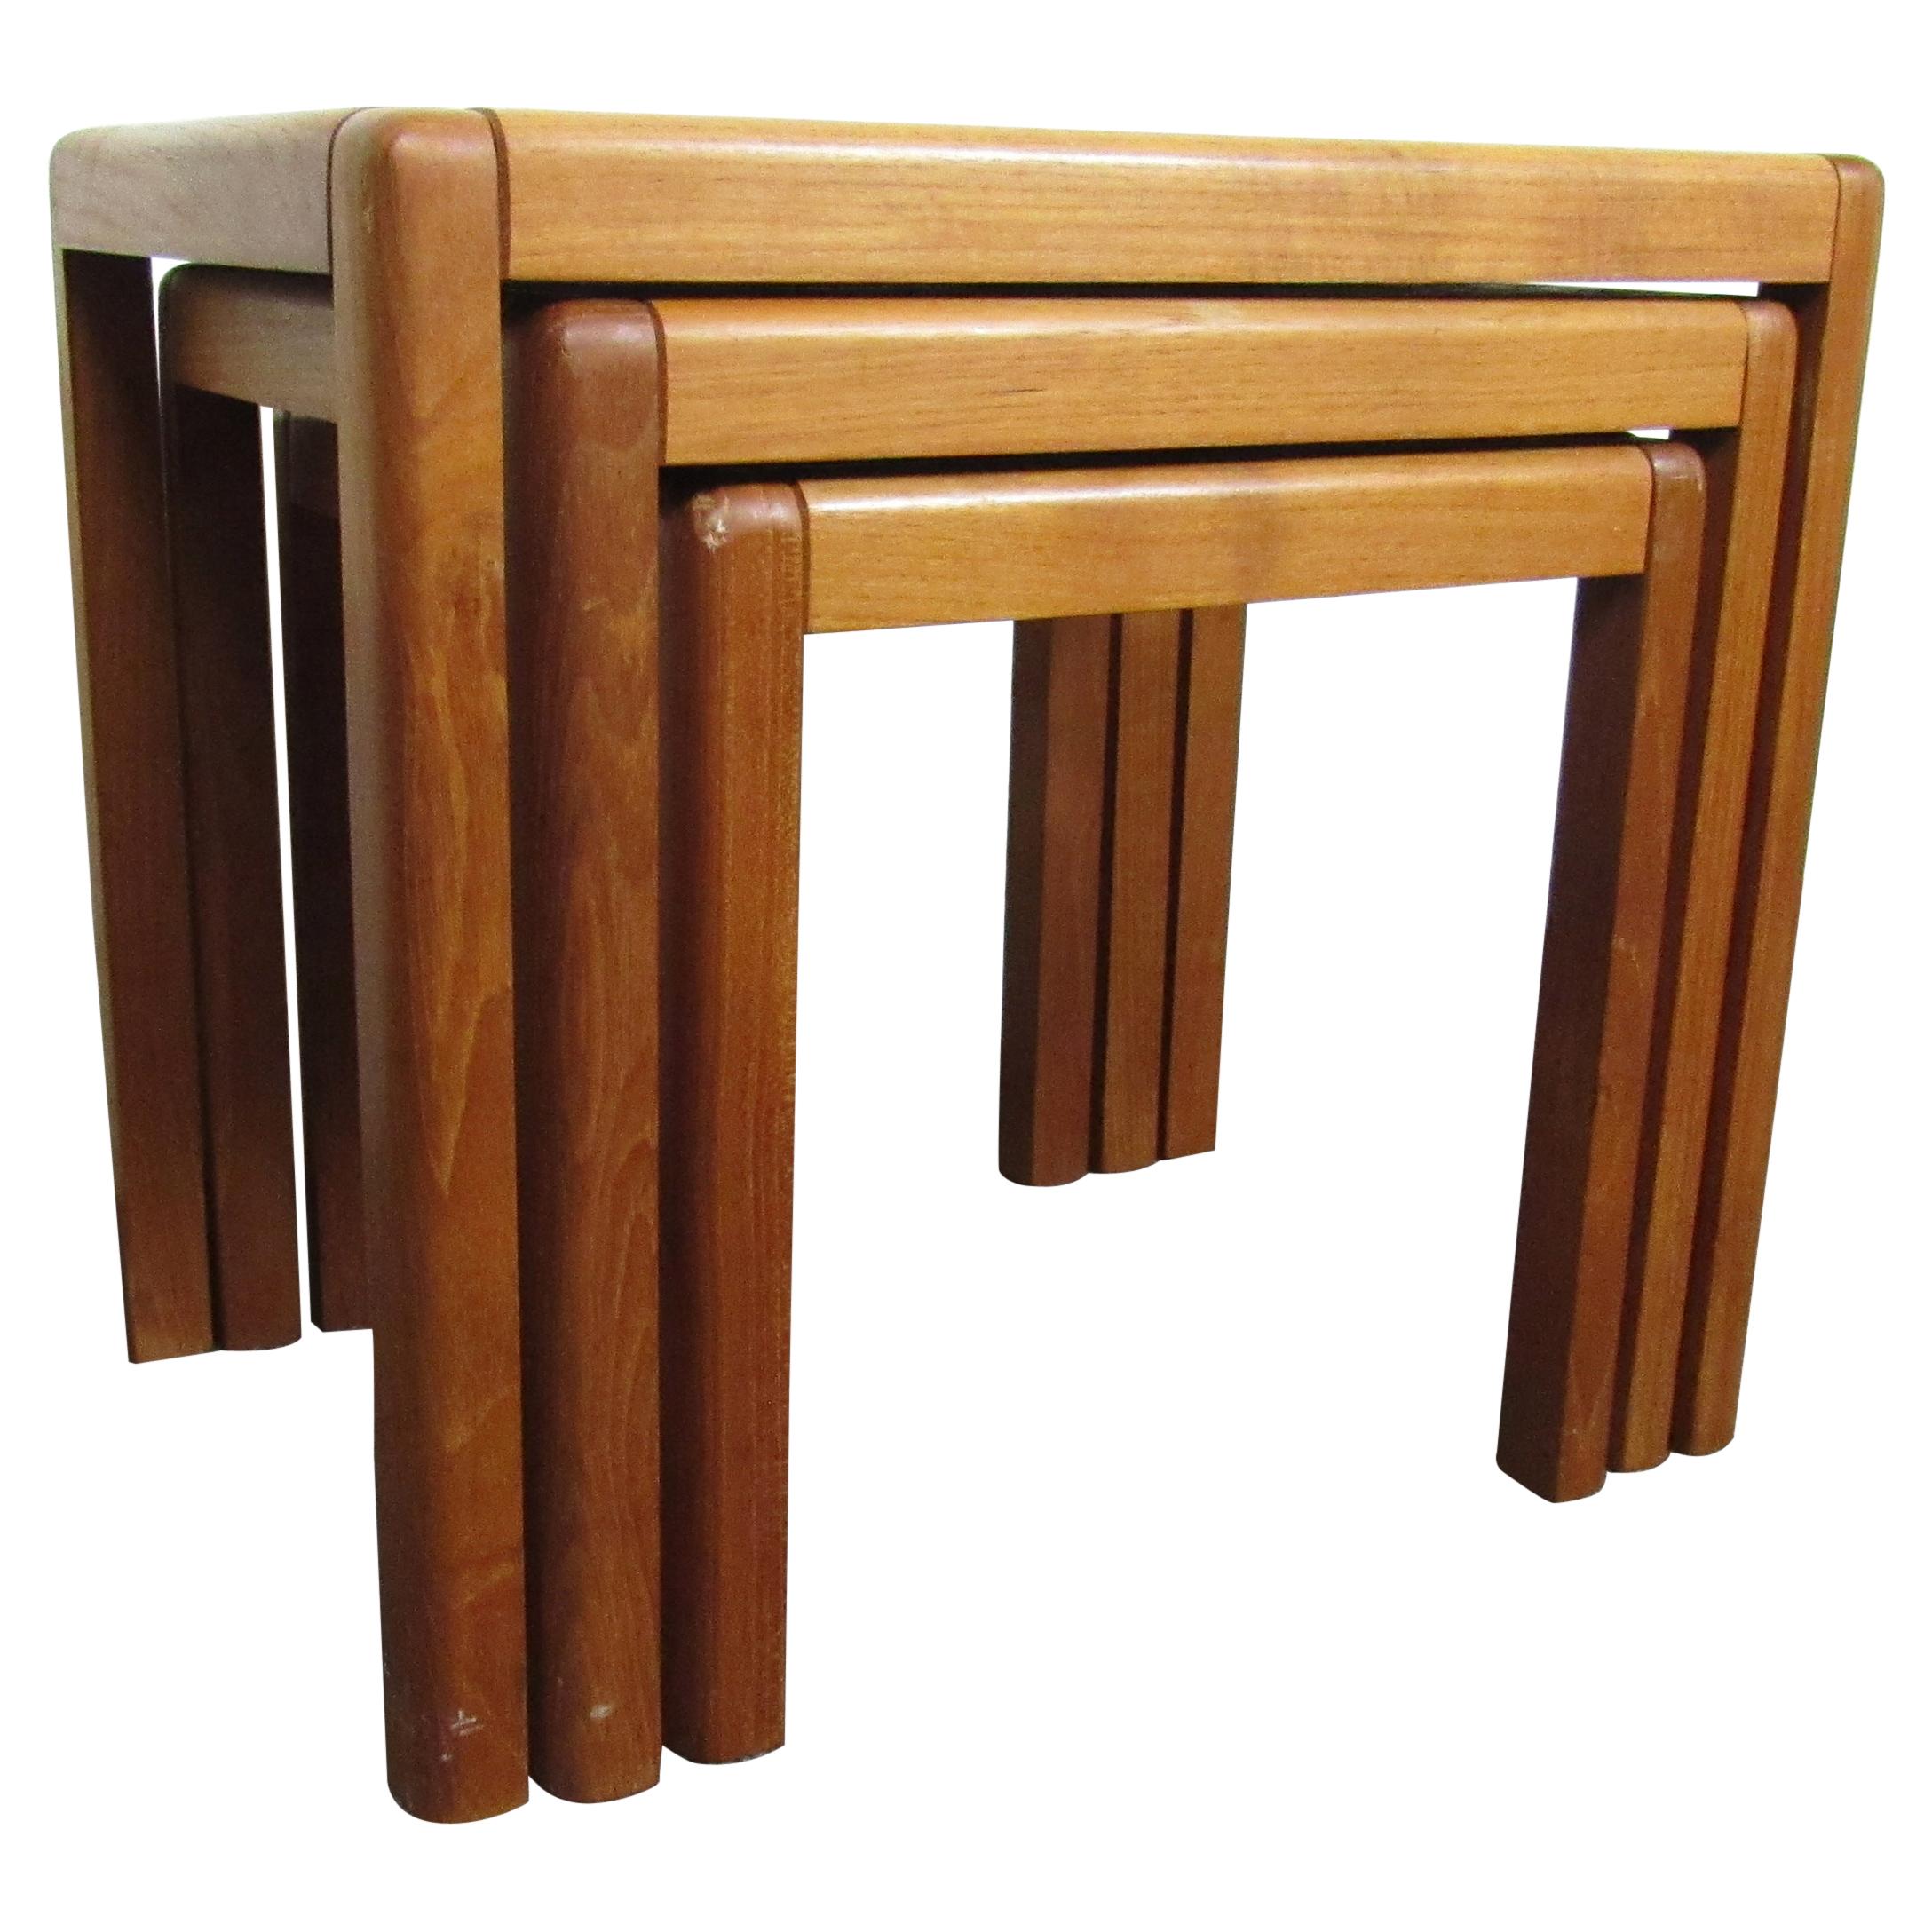 This set of three Mid-Century Modern nesting tables show off a rich teak woodgrain complemented by tile inlays. Made in Denmark. Please confirm item location with seller (NY/NJ).